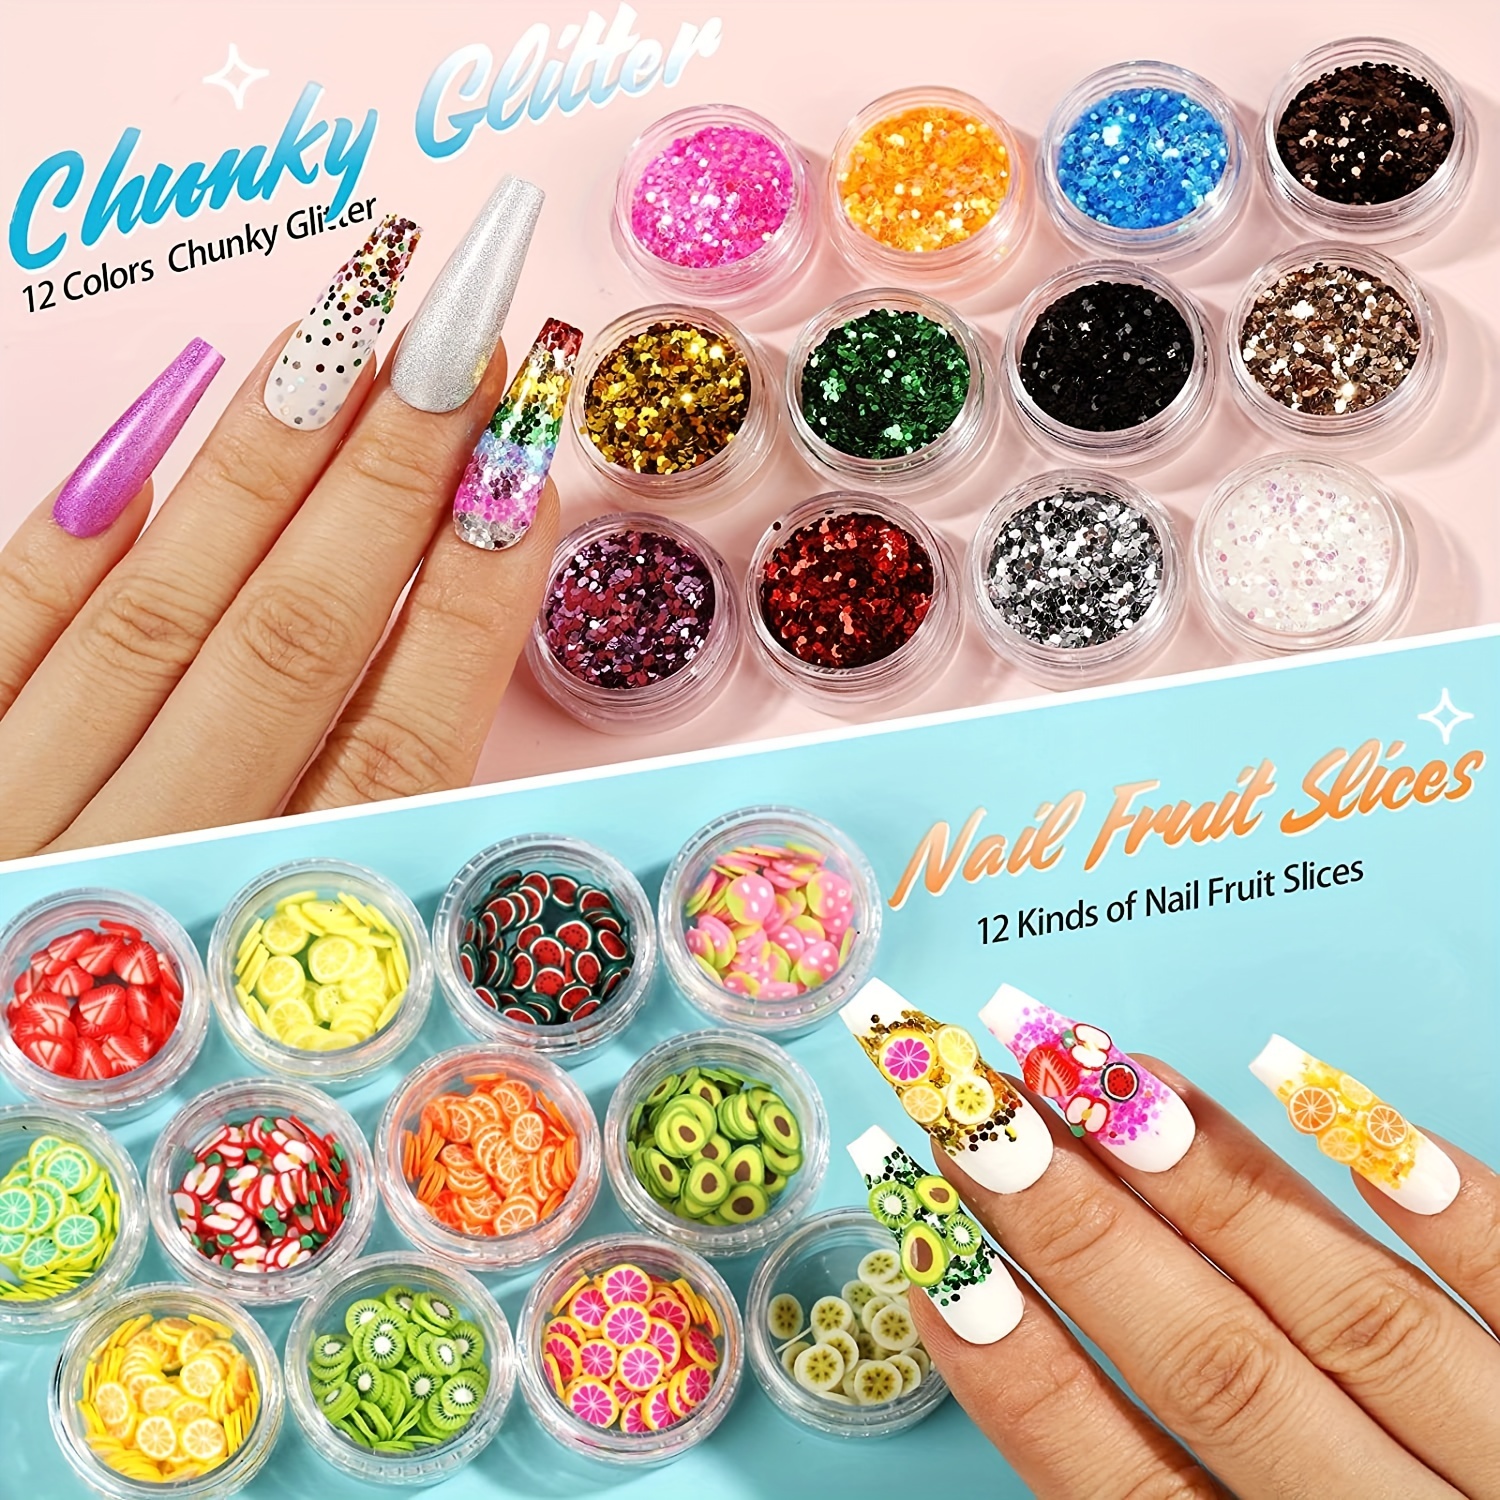 Nail Art Sequins Rectangle Flakes Glitter For Nails Decoration Bright